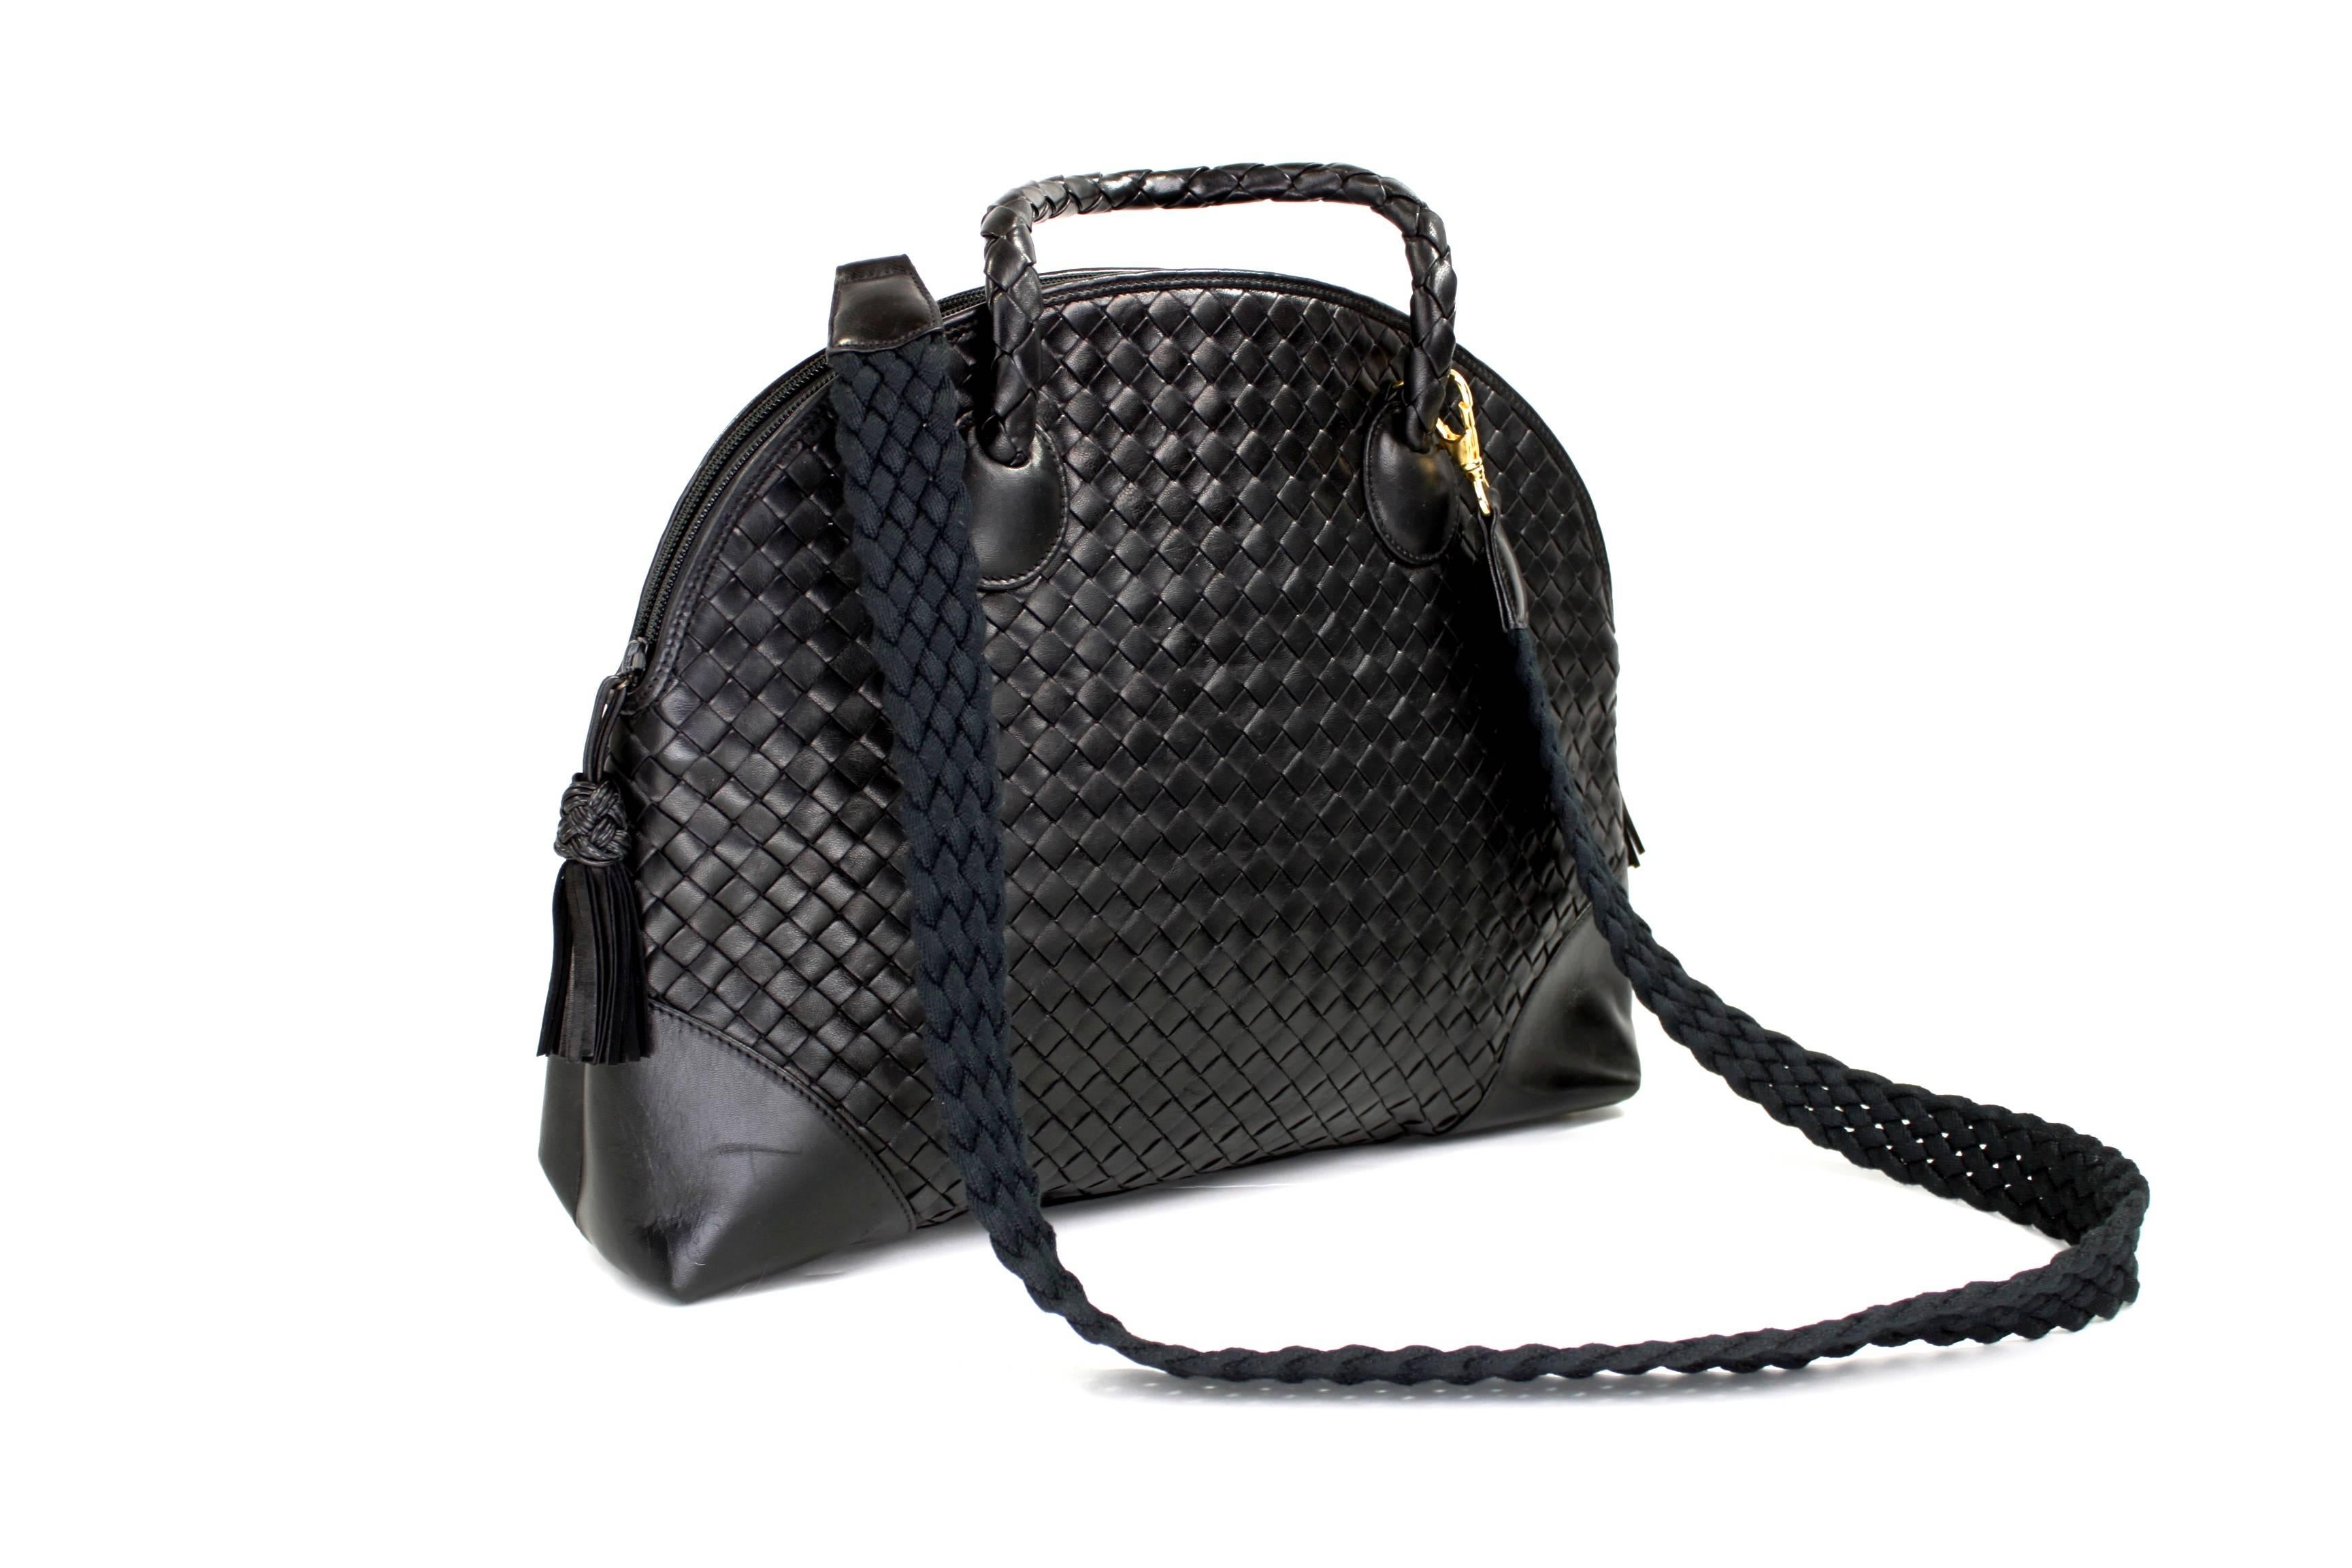 This gorgeous, large sized Bottega Veneta bag is done in the brand's iconic woven leather. It features braided handles, as well as a removable woven shoulder strap. The bag features a double-zip closure with two large compartments. One compartment